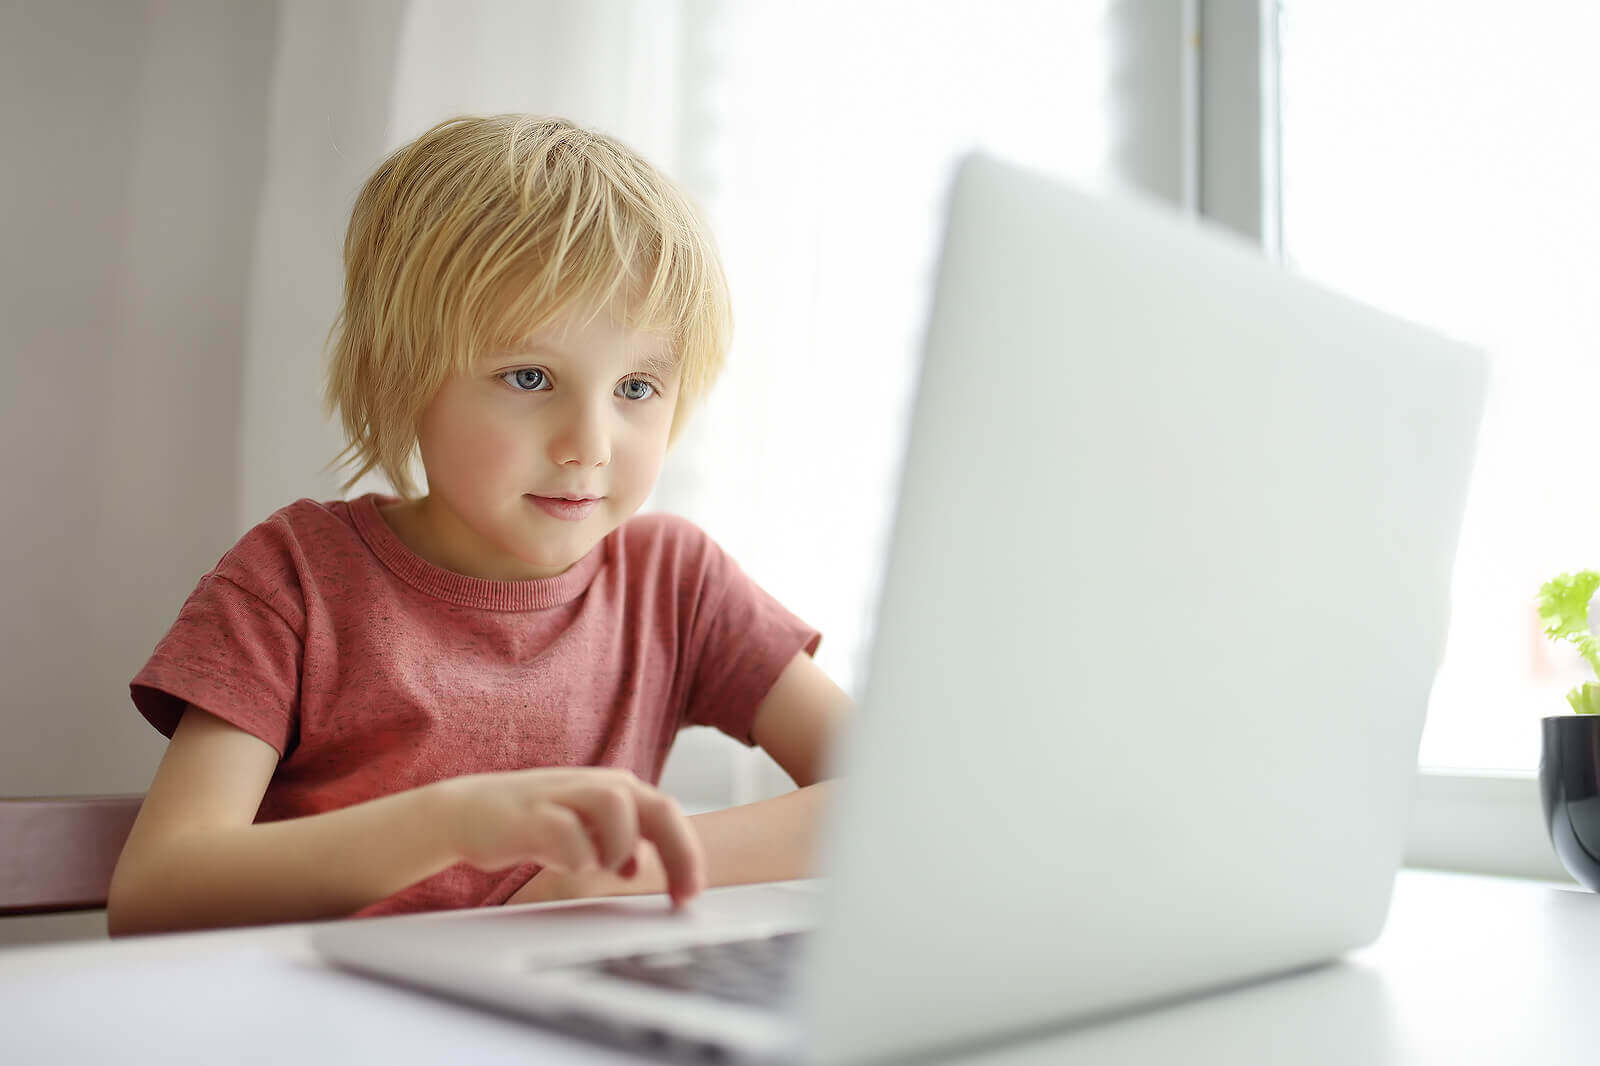 A small child using a laptop computer.